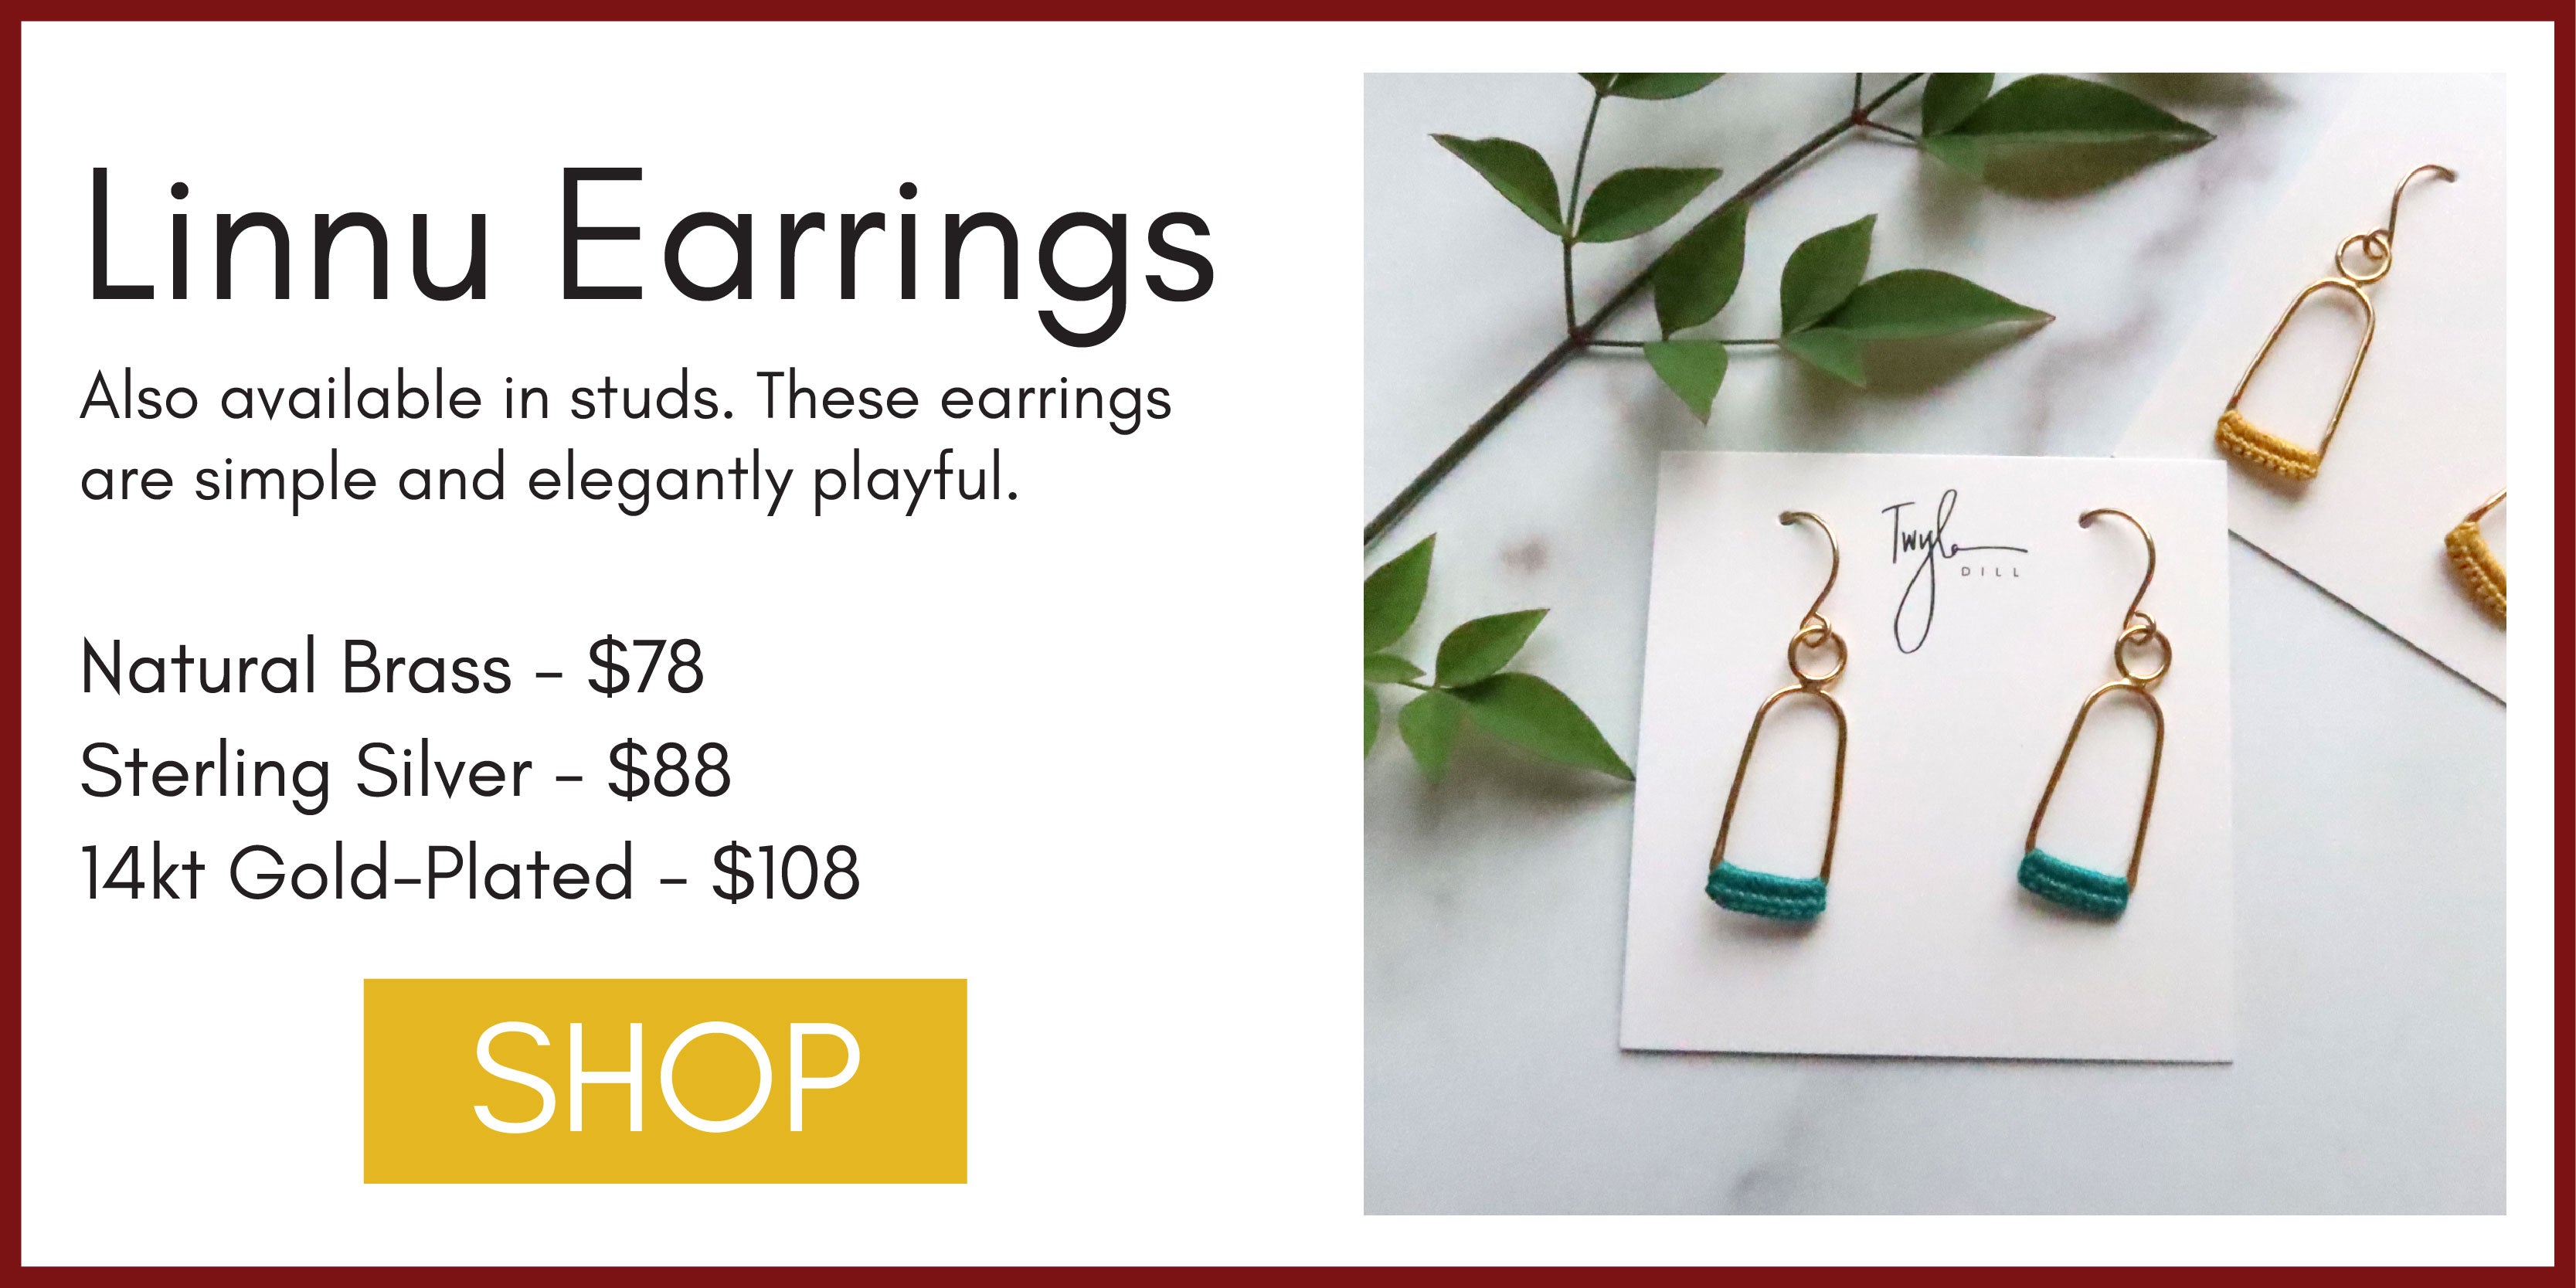 Graphic with title "Linnu Earrings" and an image that shows the Linnu Earrings in Turquoise on a jewelry card with holiday greenery in the background